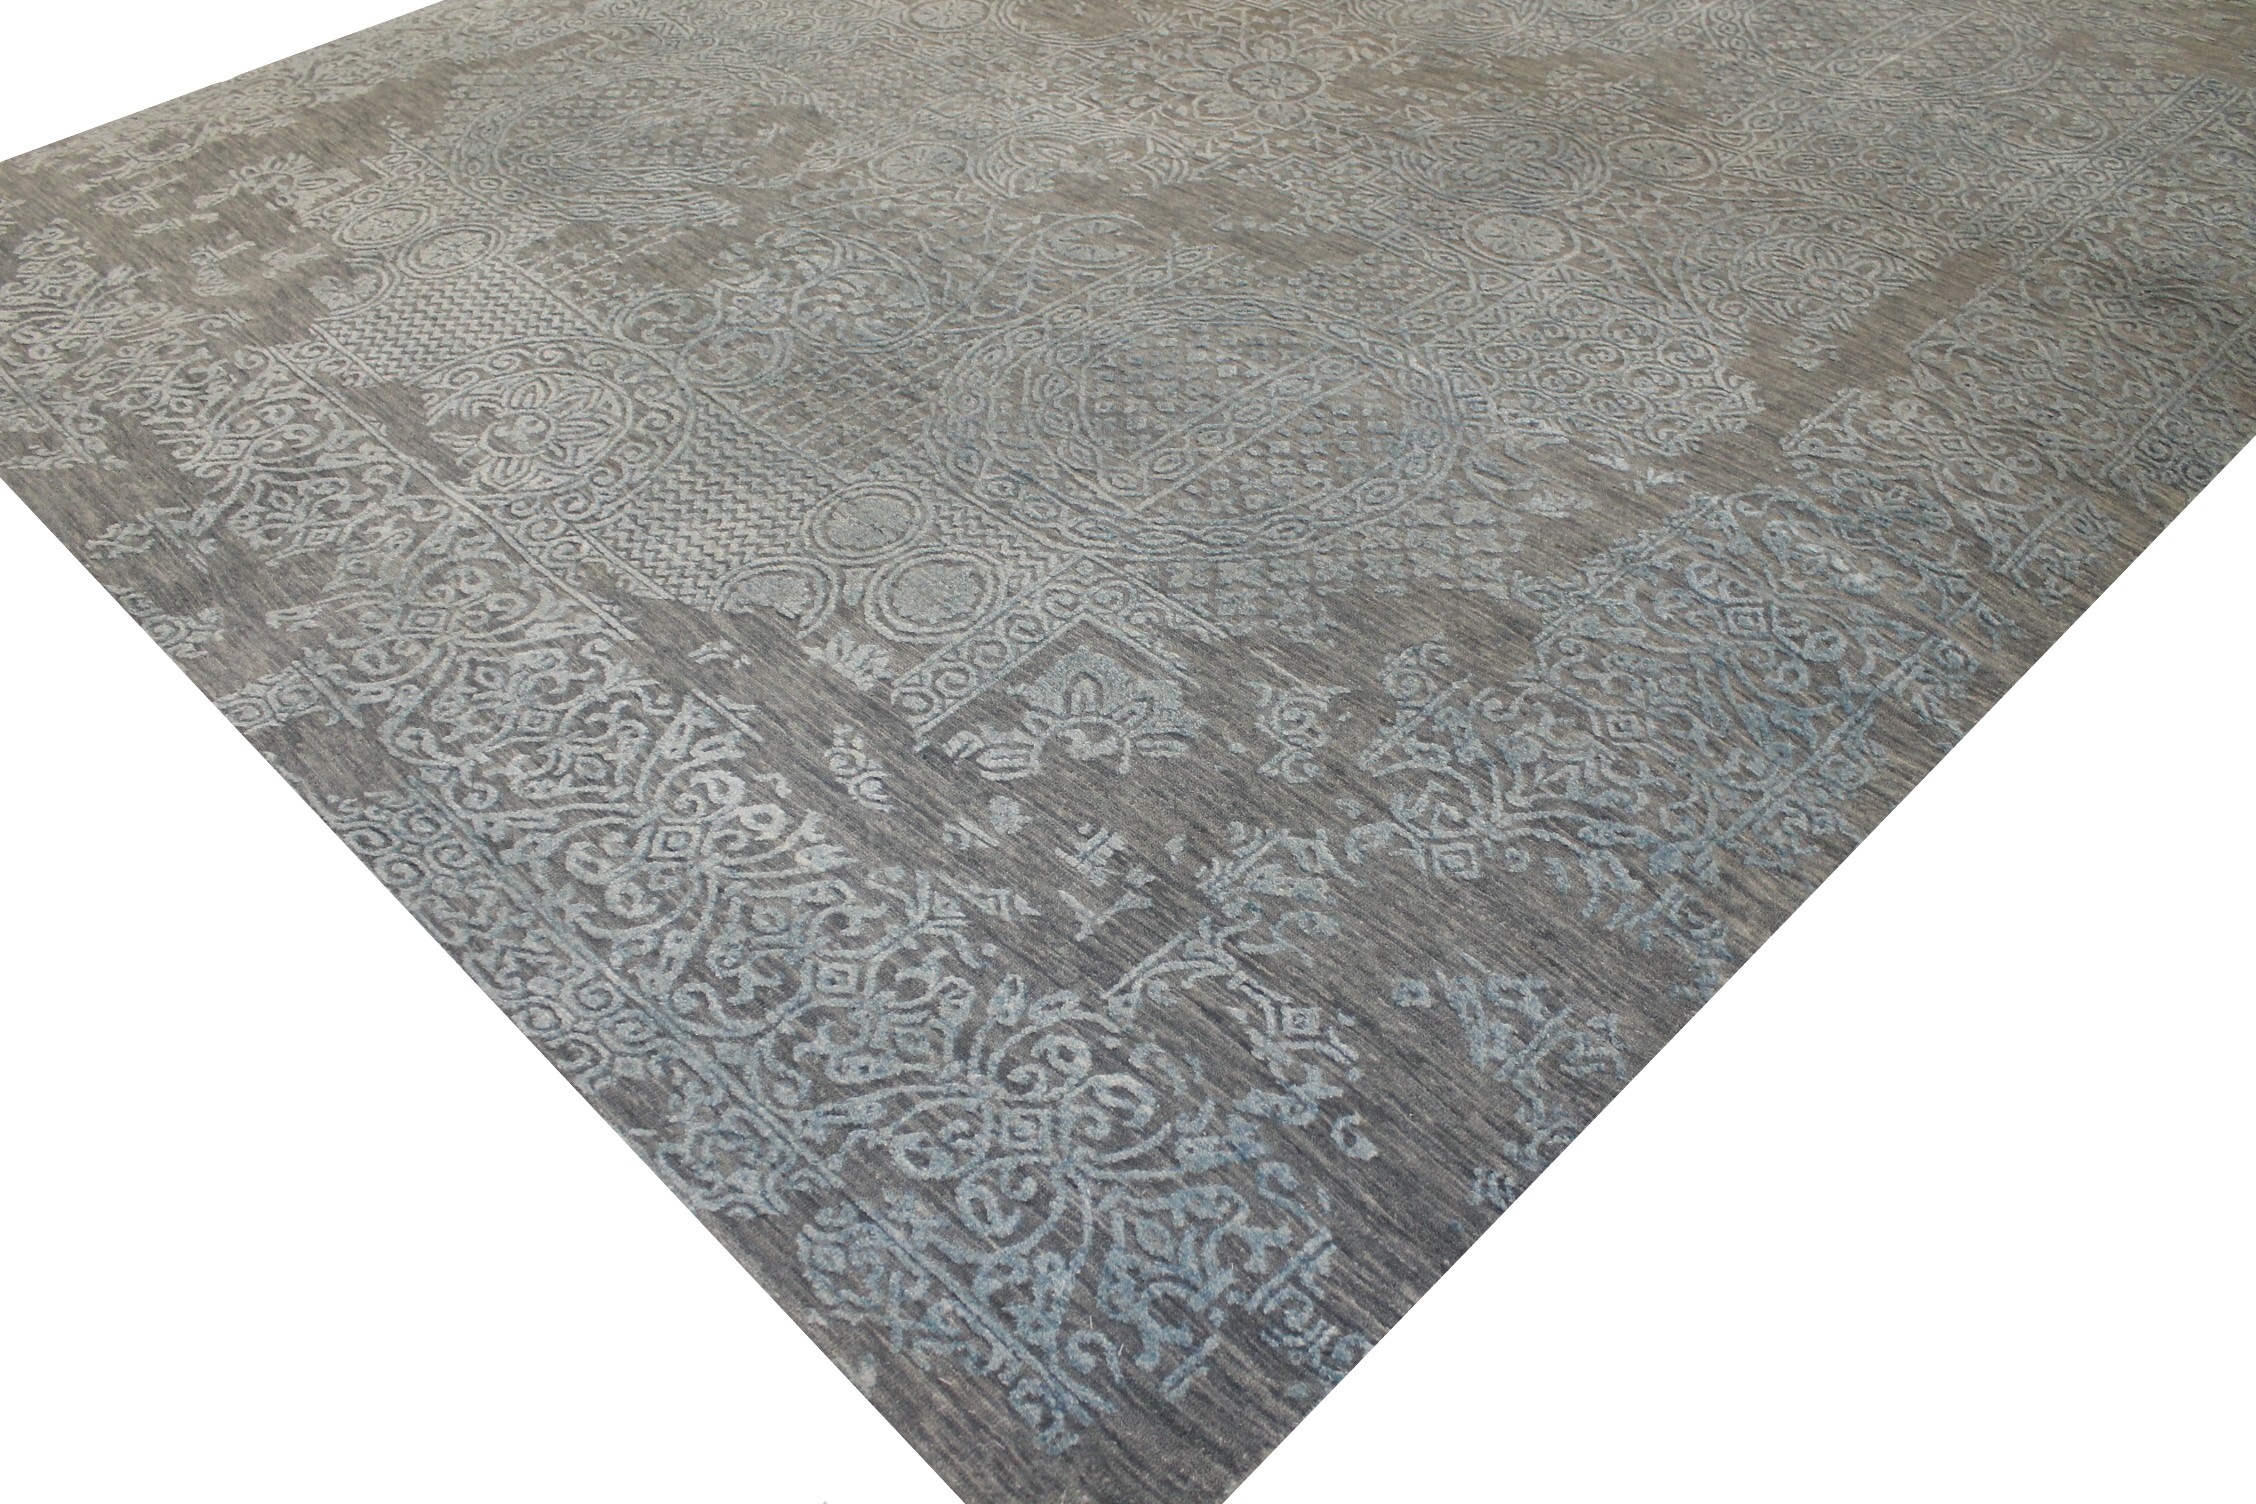 8x10  Hand Knotted Wool Area Rug - MR022834